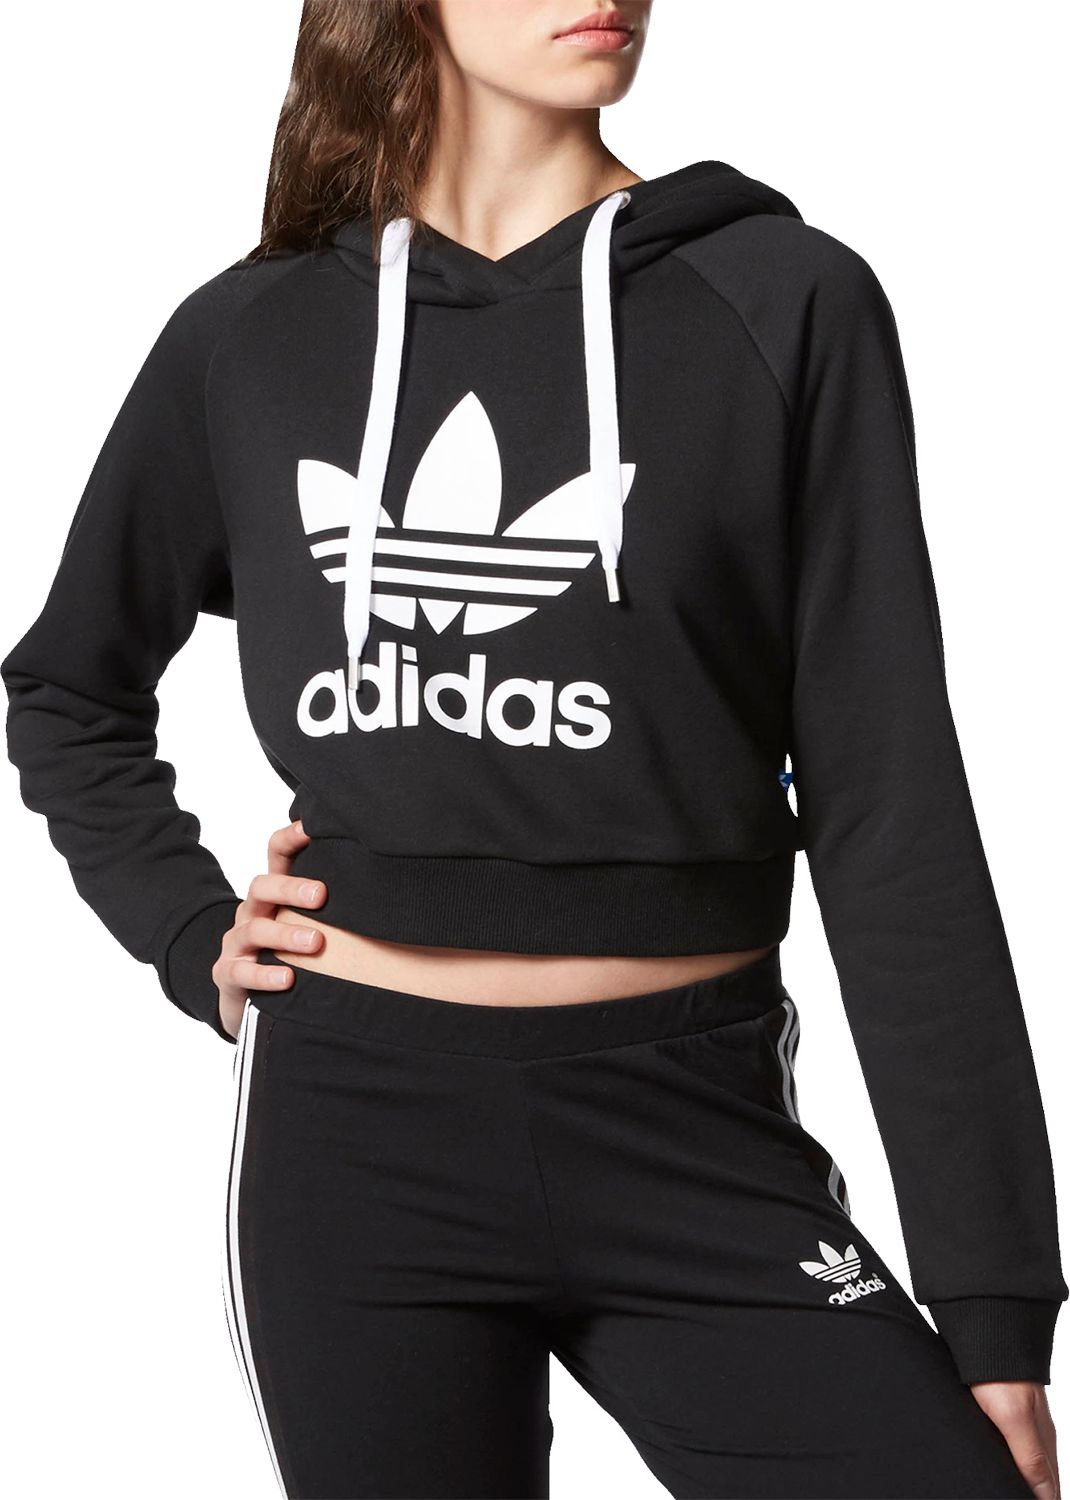 Adidas sweatshirt – made of pure cotton and other high grade materials